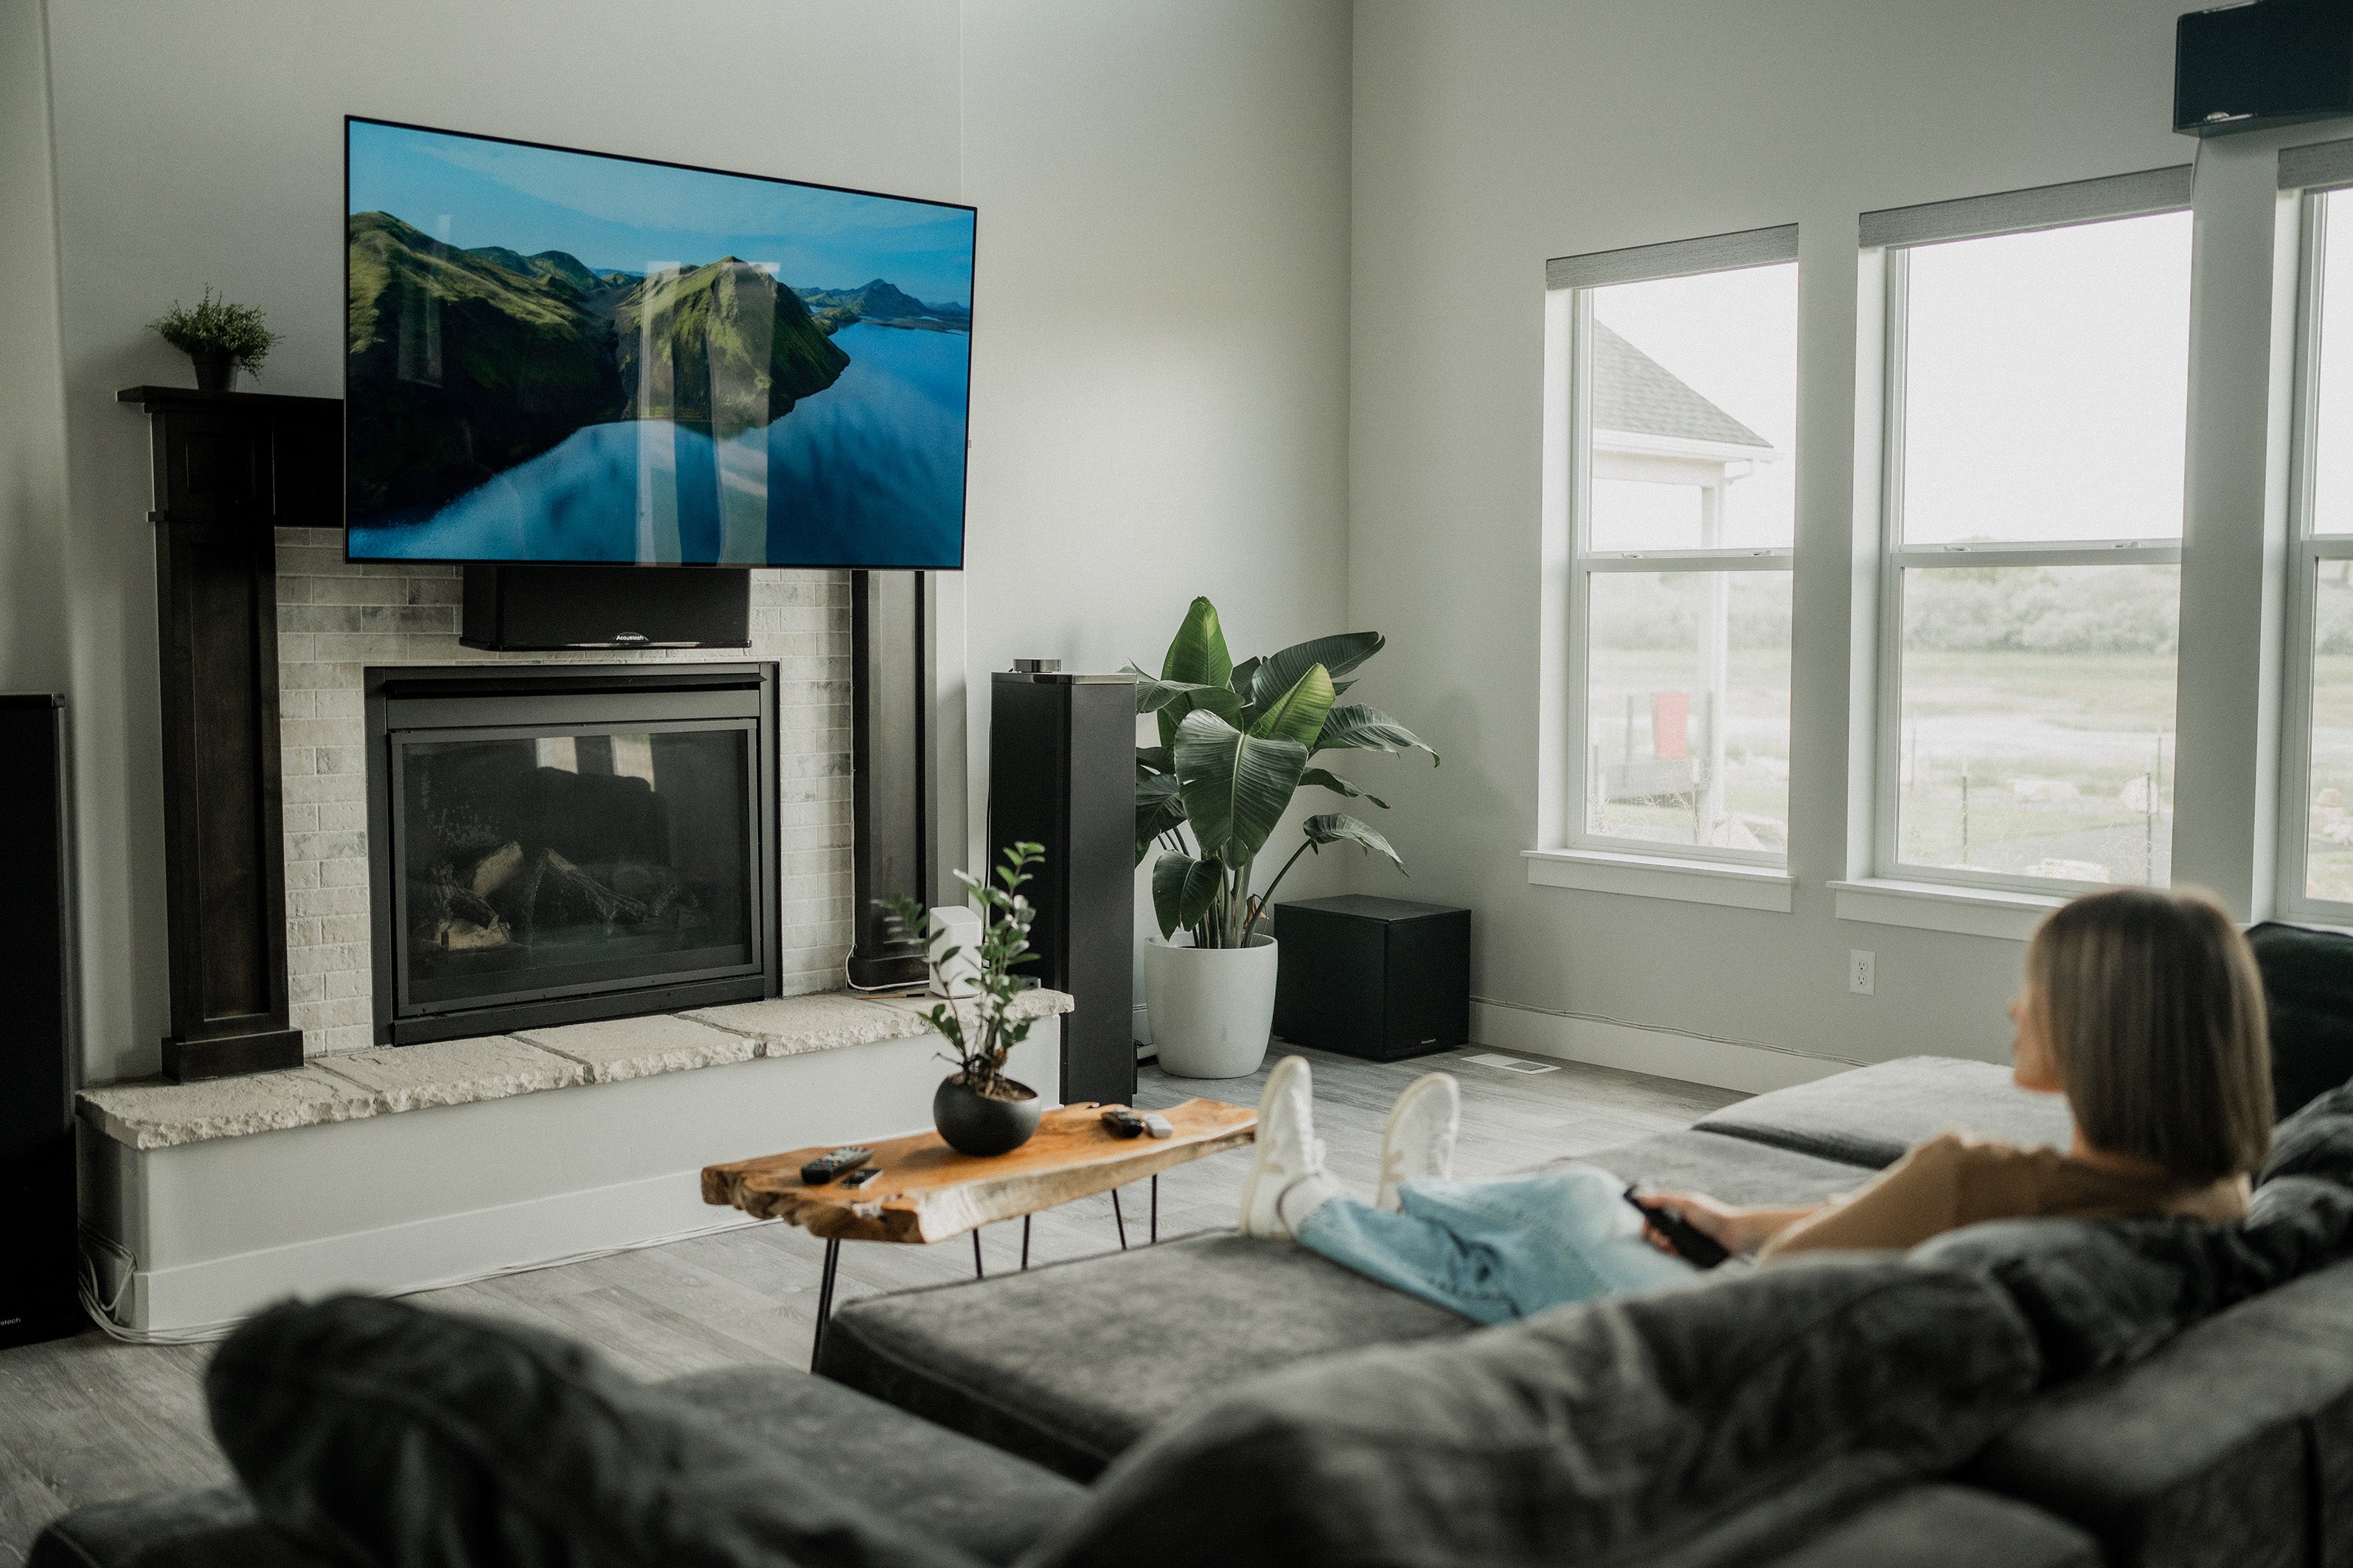 How to Choose a TV Wall Mount